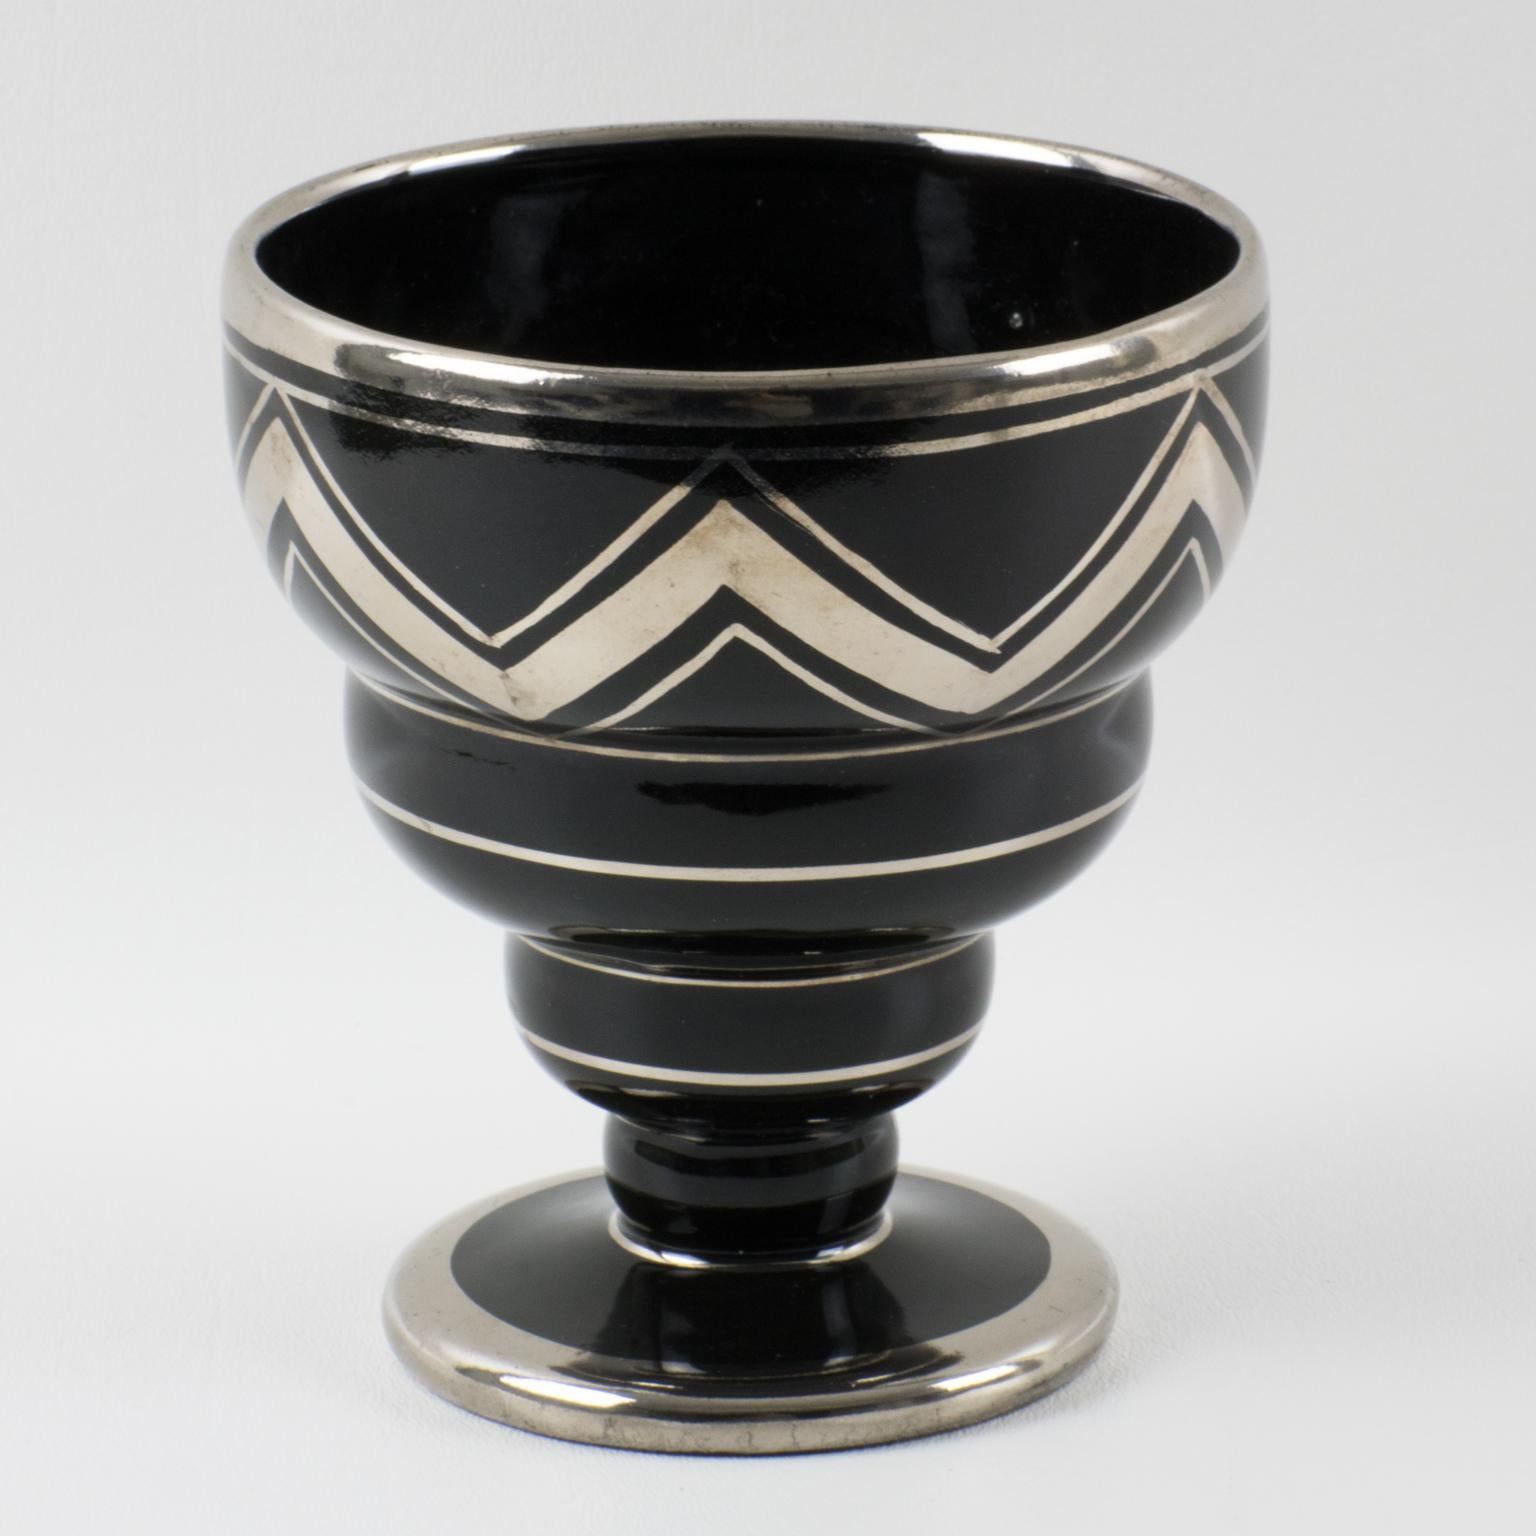 Ceram, Rouen, France, designed and crafted this stylish 1930s French Art Deco black ceramic vase. The decorative piece features silver deposit decoration with a geometric wave pattern. The original sticker label underside read 